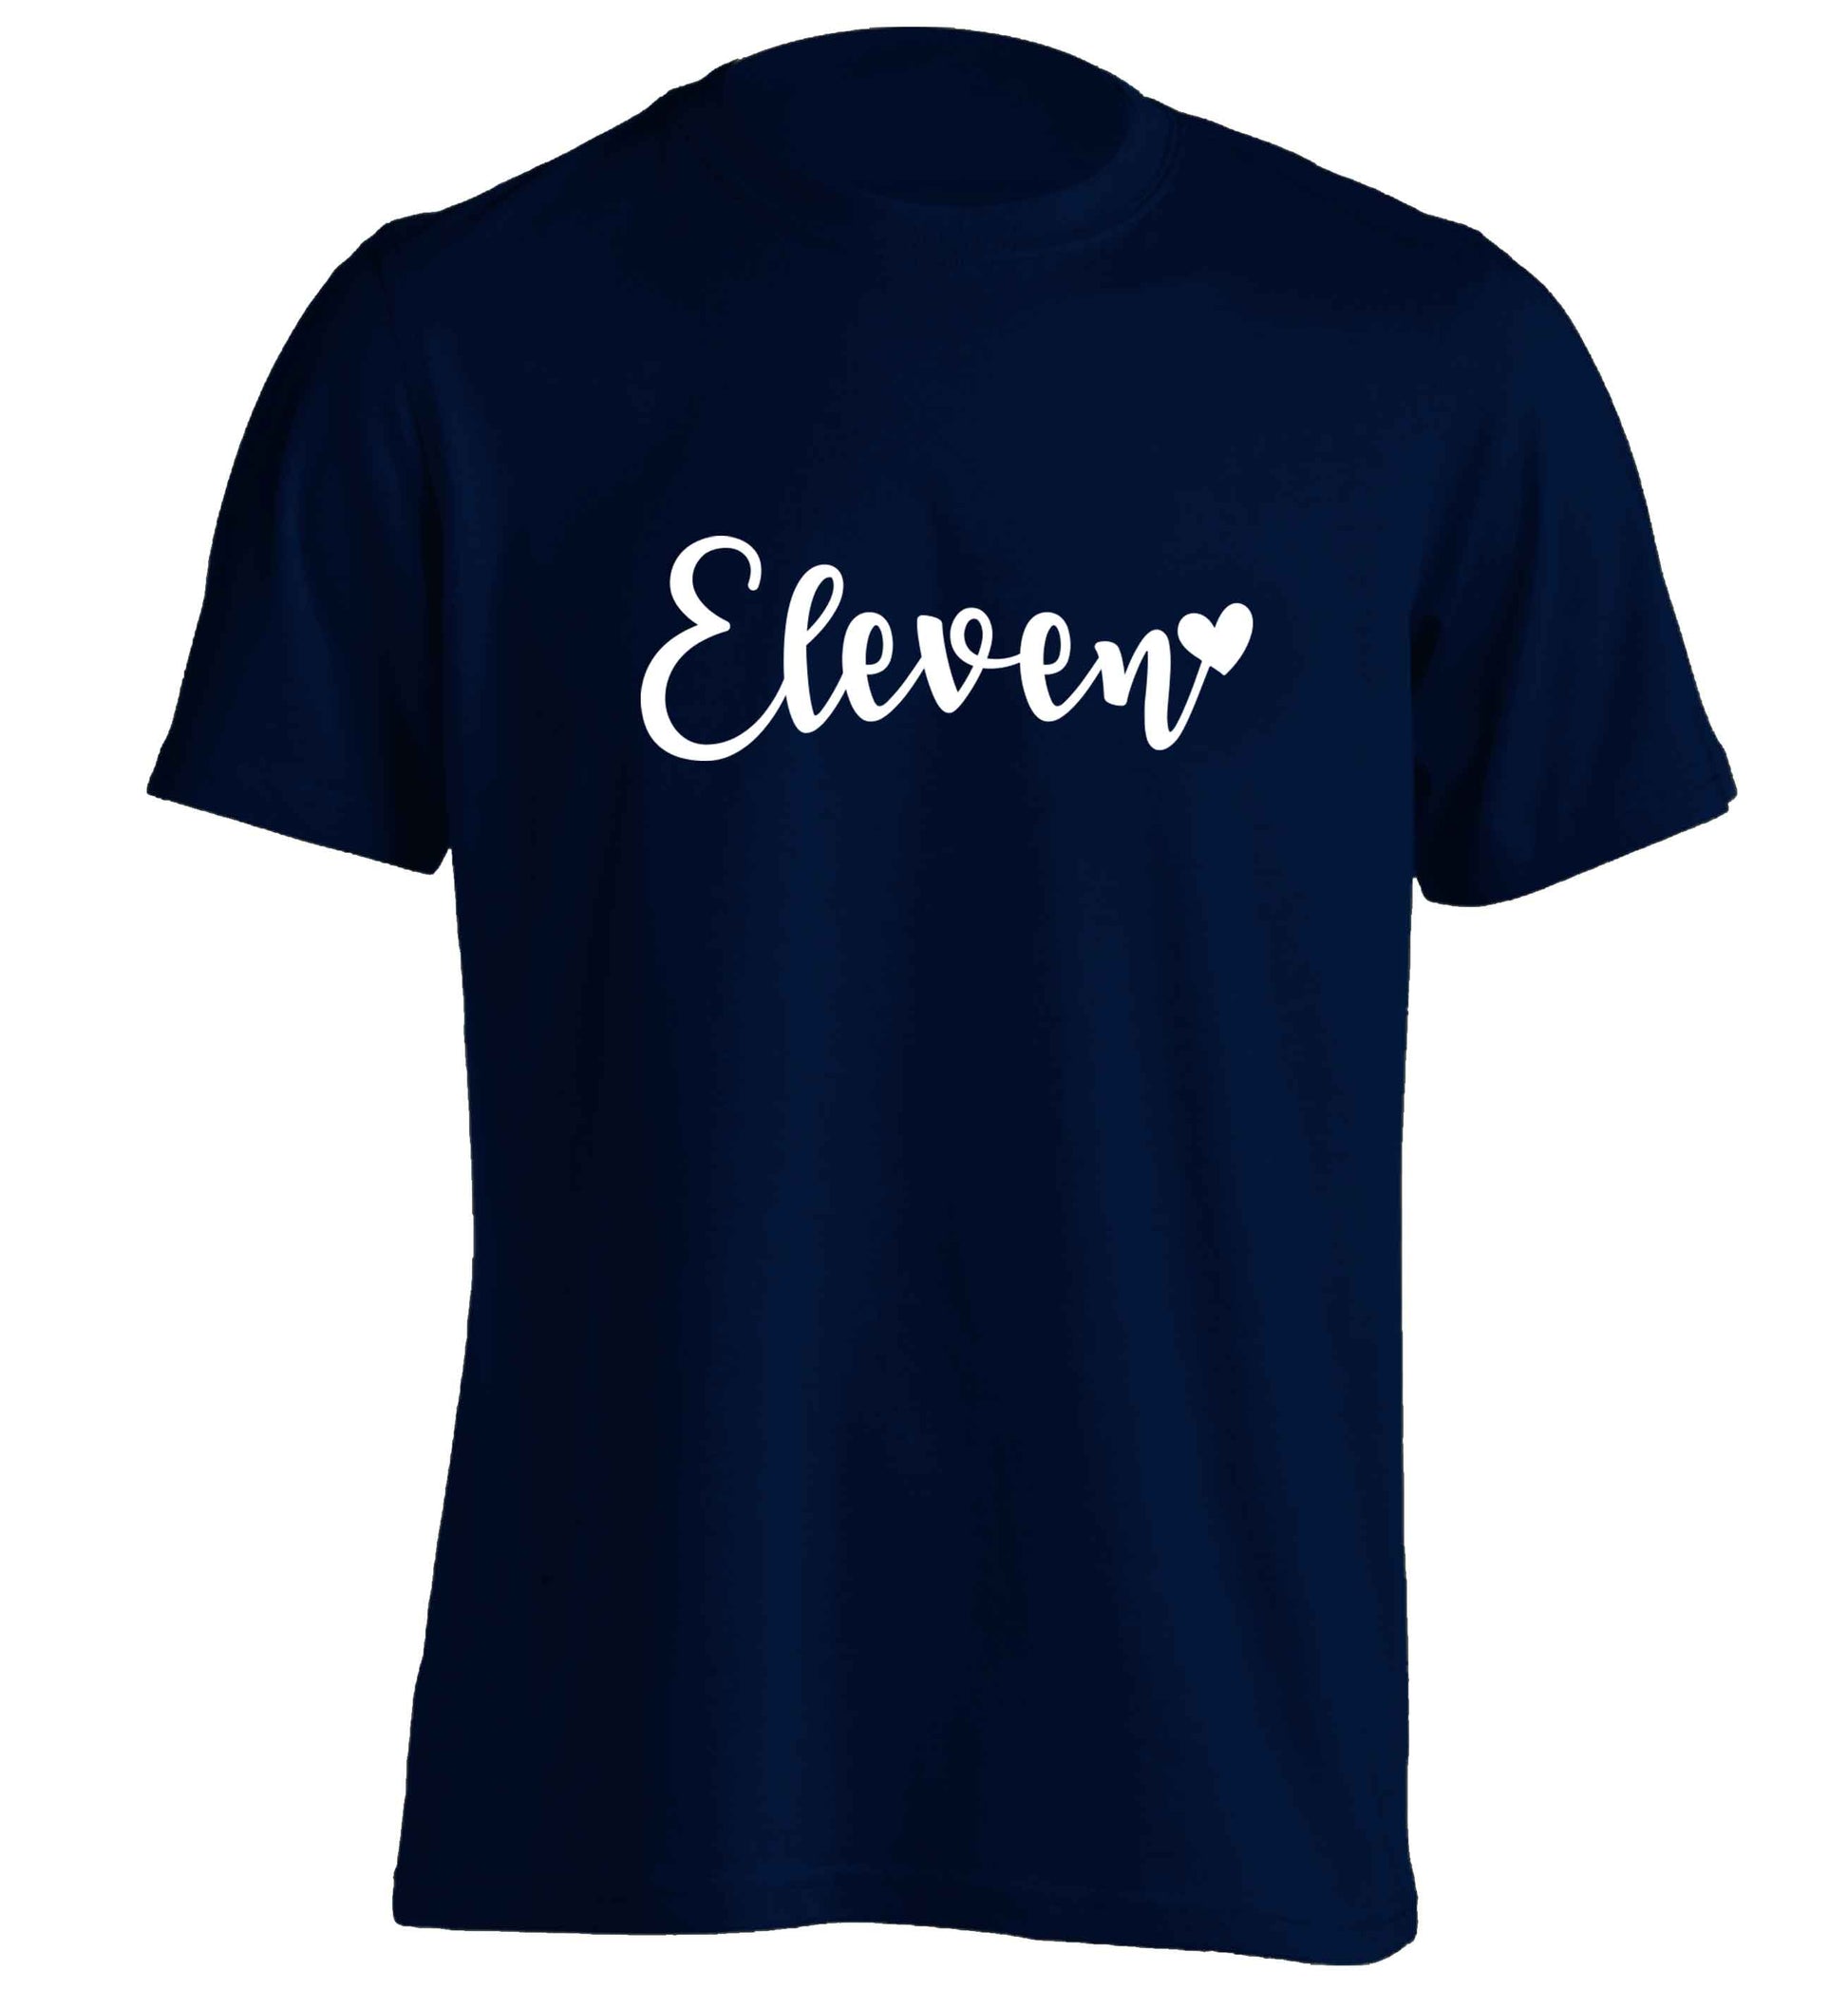 Eleven and heart! adults unisex navy Tshirt 2XL